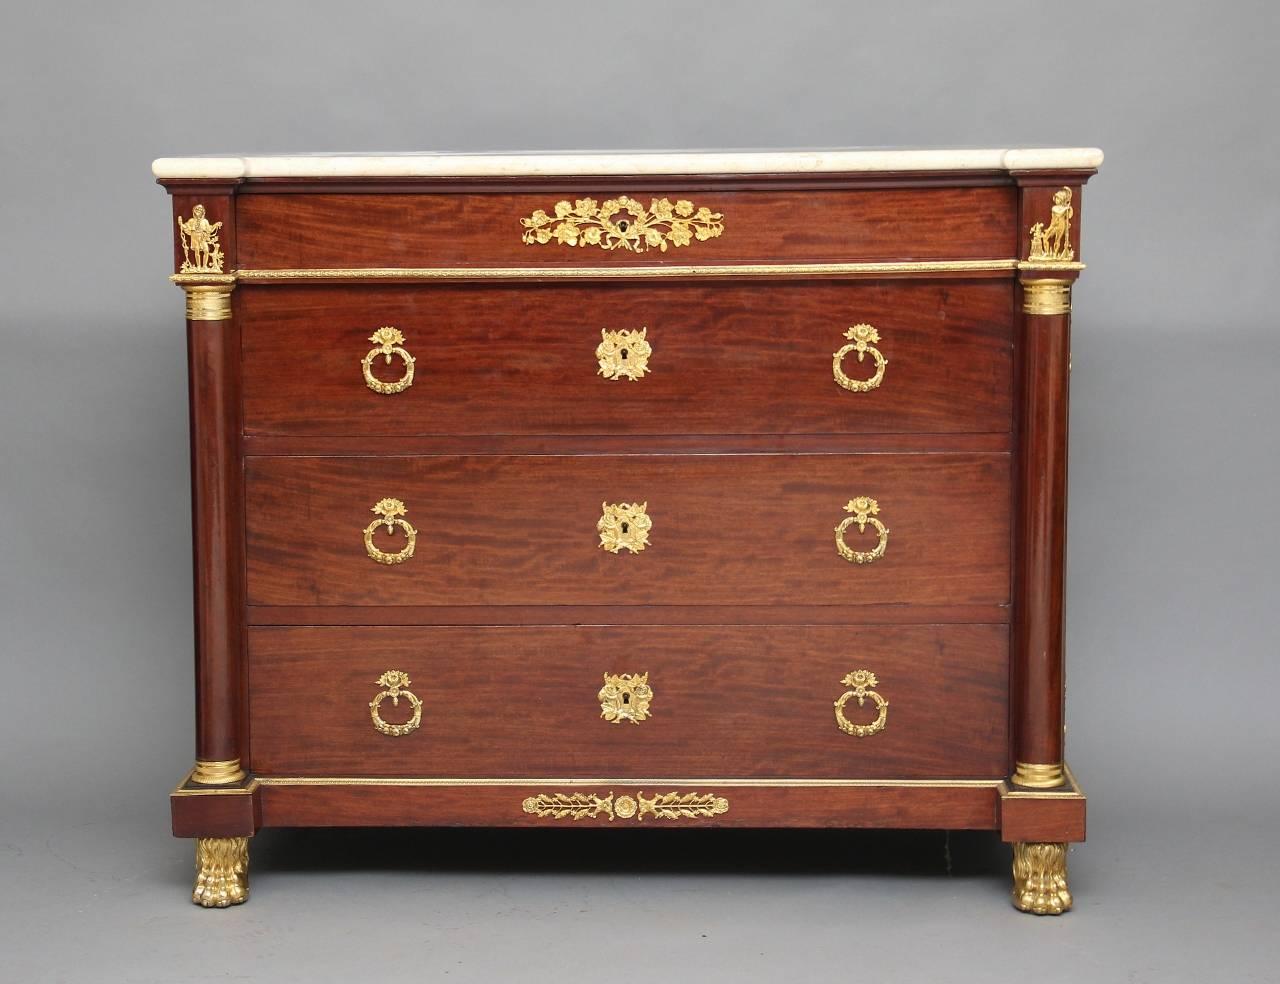 19th century French mahogany commode with a later marble top, decorated profusely on both sides and the front in original ormolu, the commode having a frieze drawer just below the marble top and three long oak lined drawers below flanked by ormolu